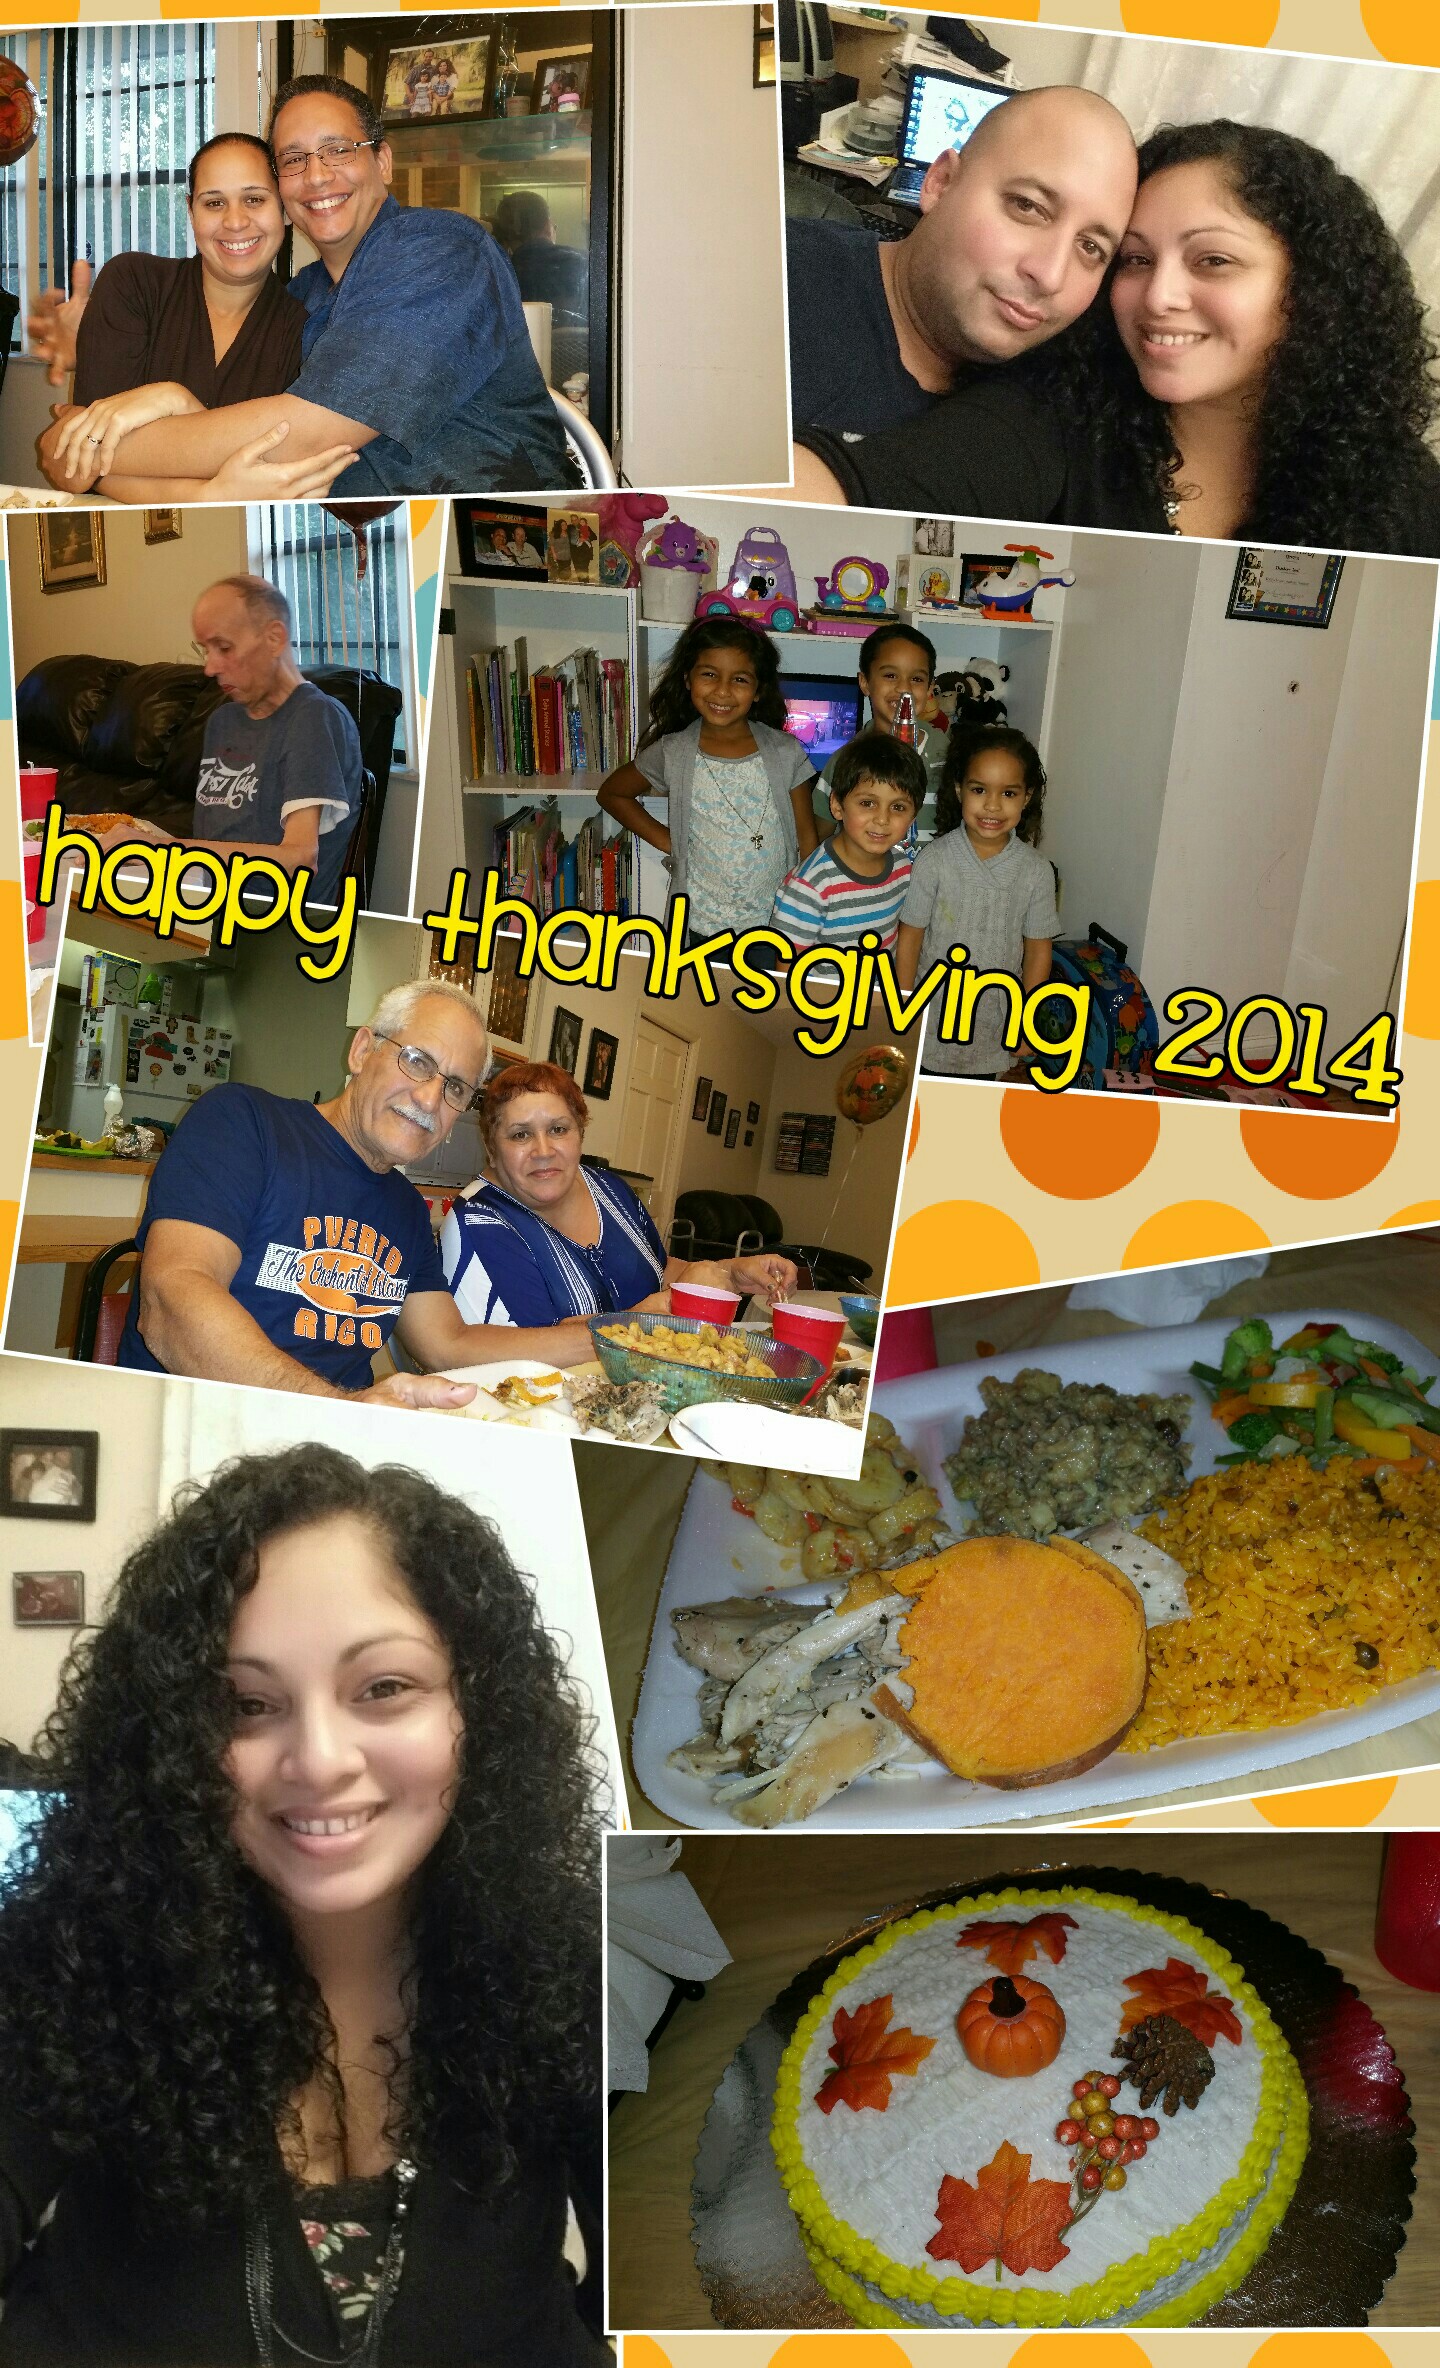 Happy Thanksgiving 2014
from my family to yours <3